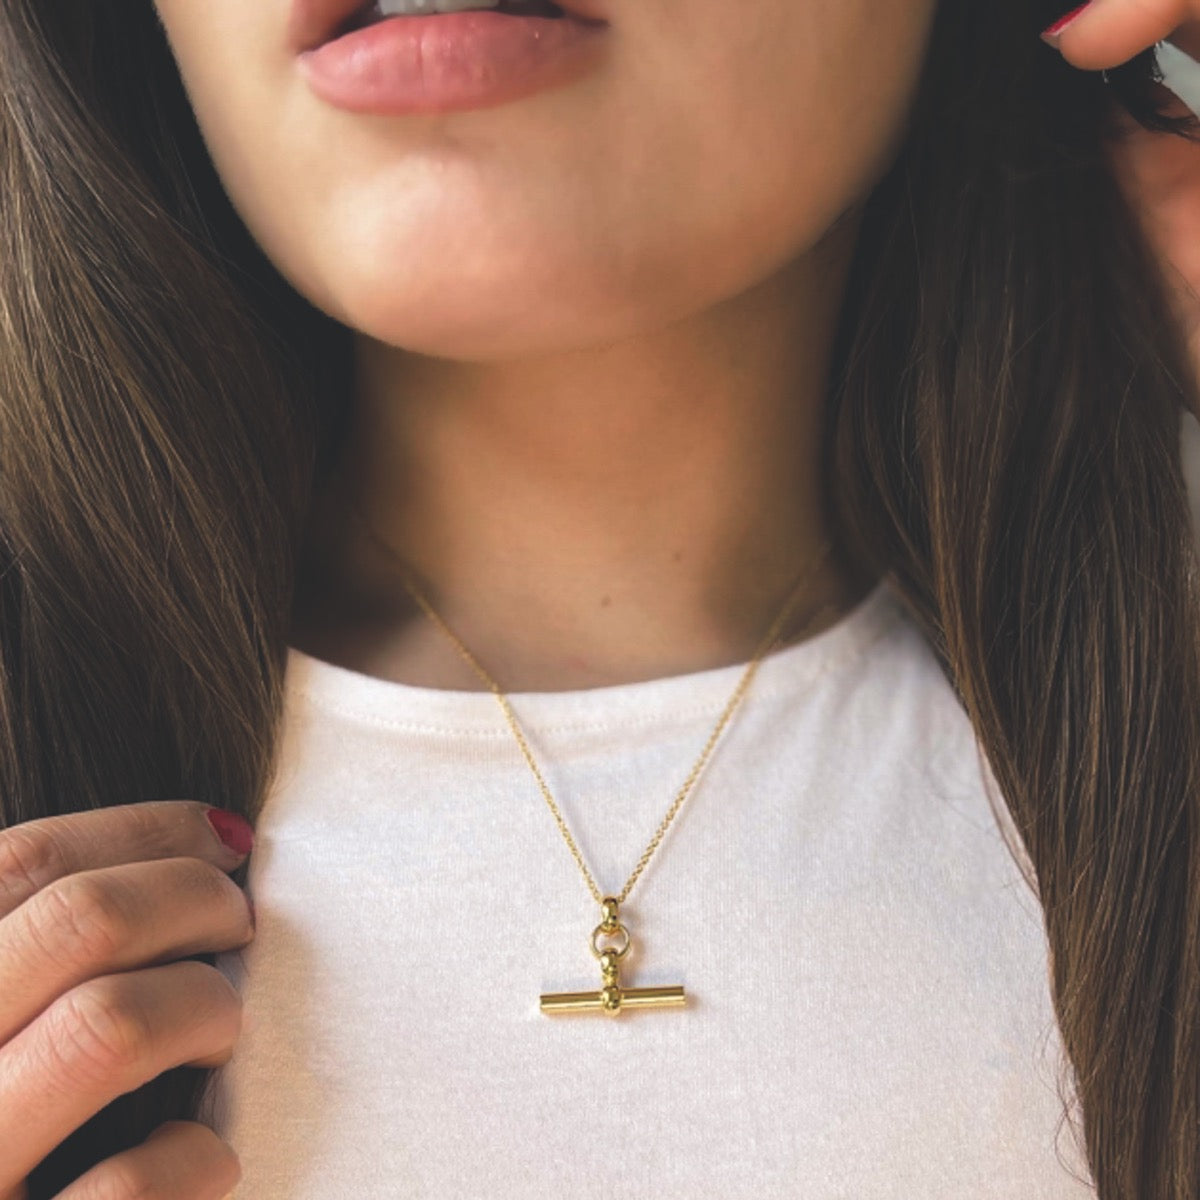 Gold plated T bar necklace on chain